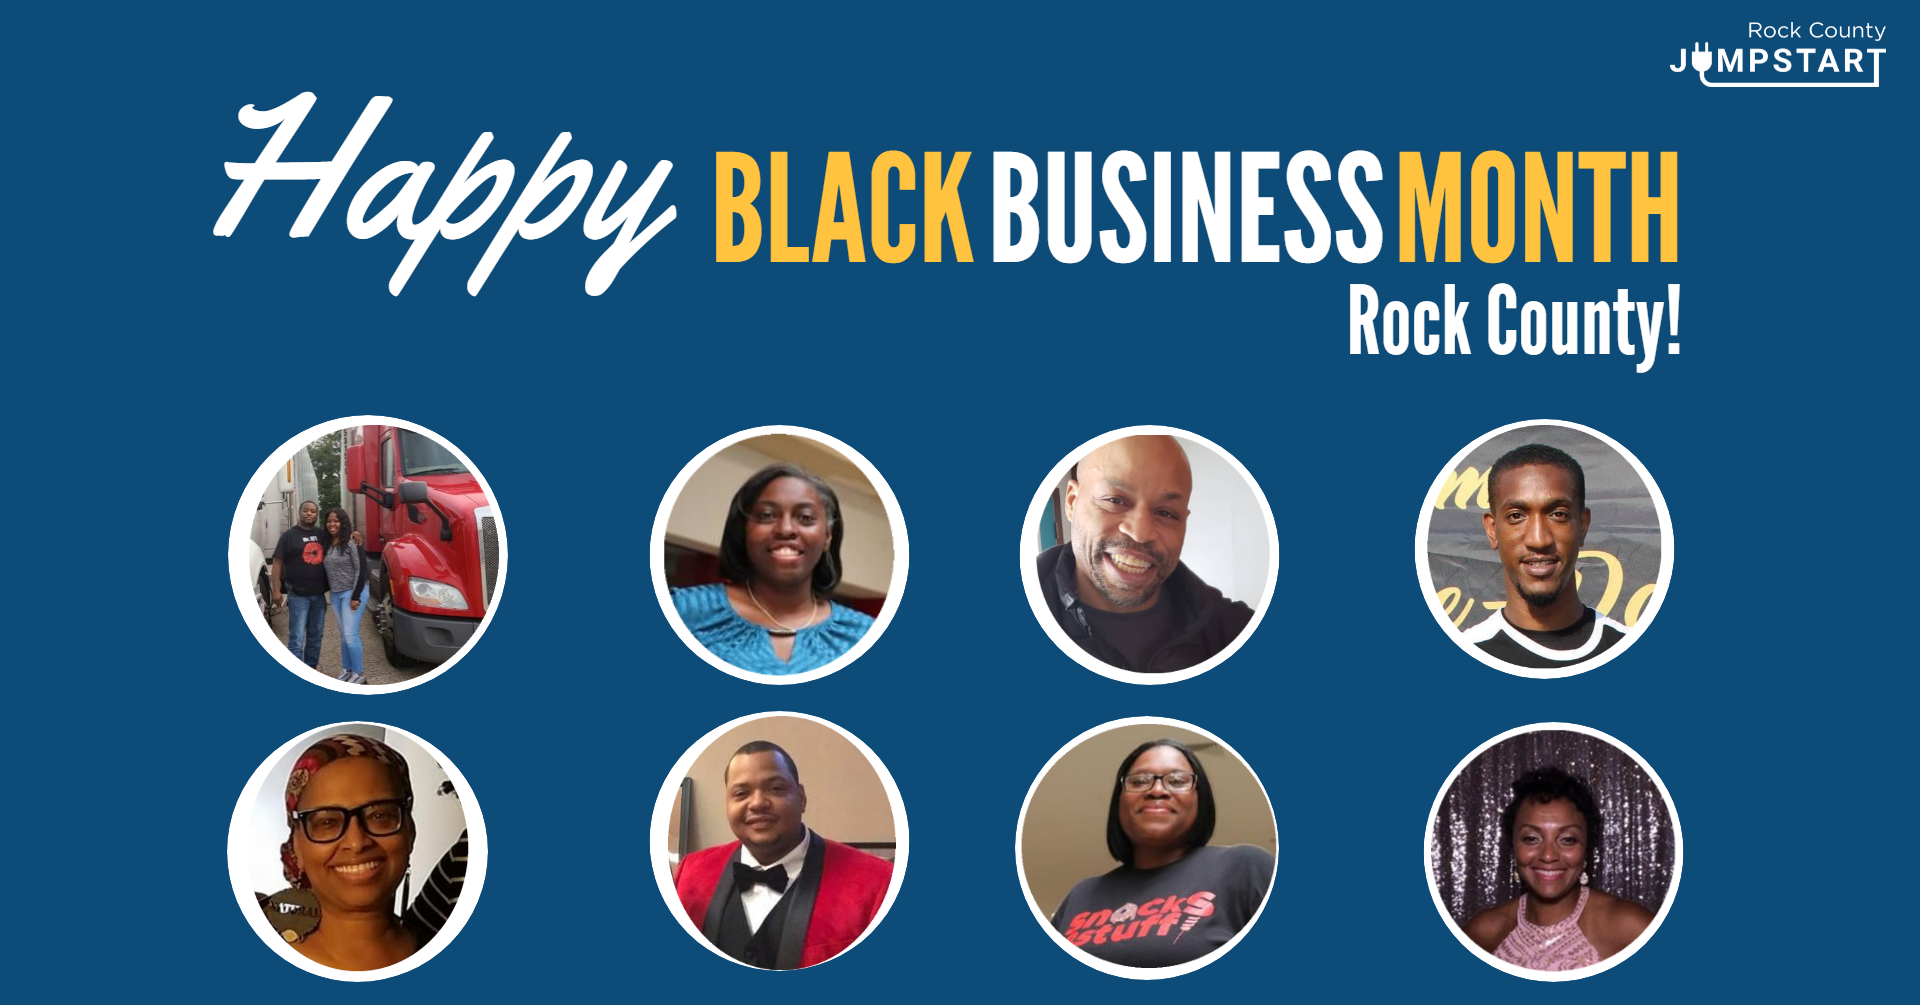 Headshots of nine business owners in Rock County, WI with the message, “Happy Black Business Month Rock County!” above.